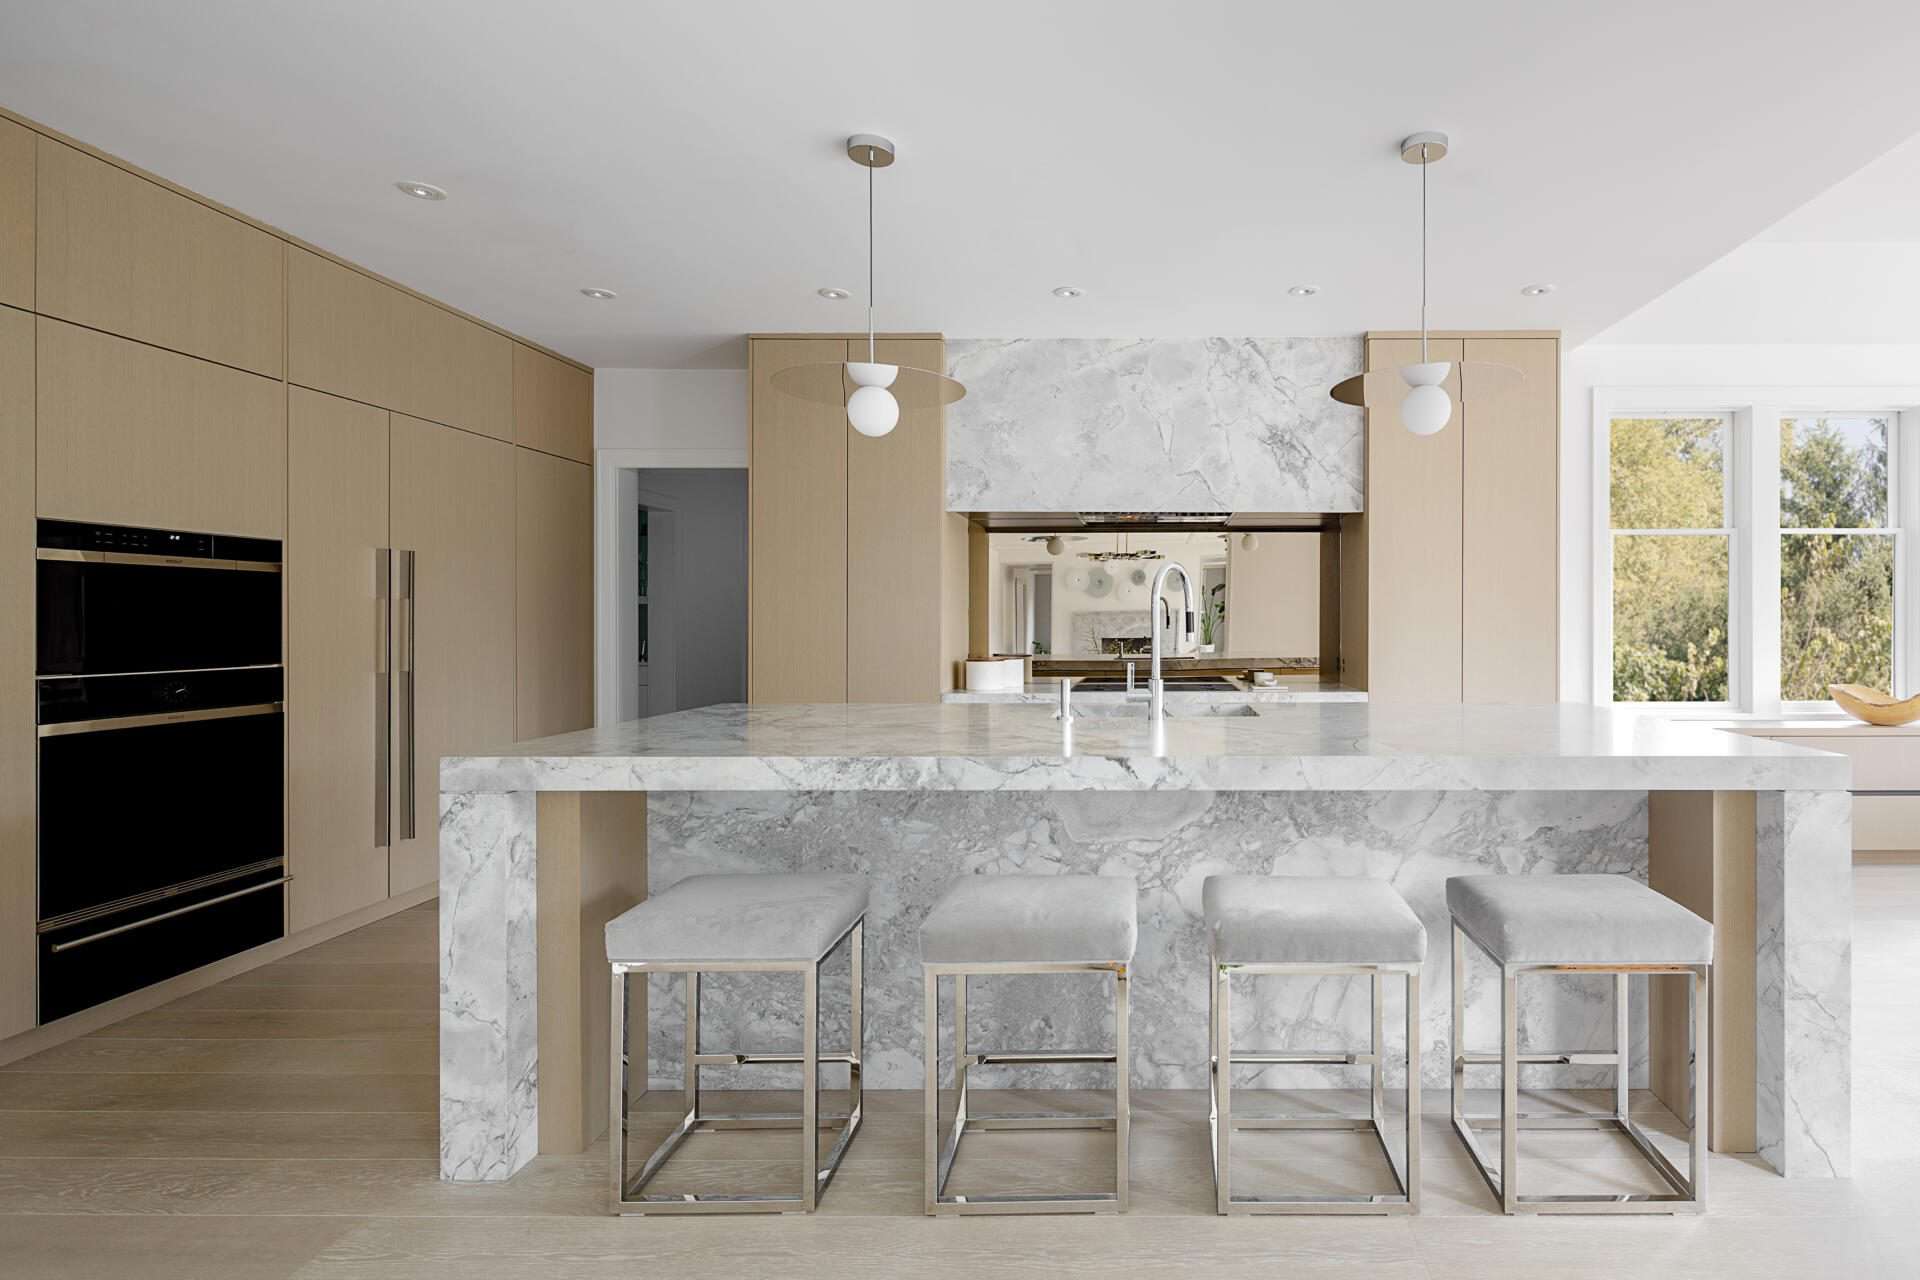 Contemporary kitchen features Caesarstone nougat countertops, glass and alumasteel accents and Artcraft horizontal grain quarter sawn oak and white gloss cabinetry.